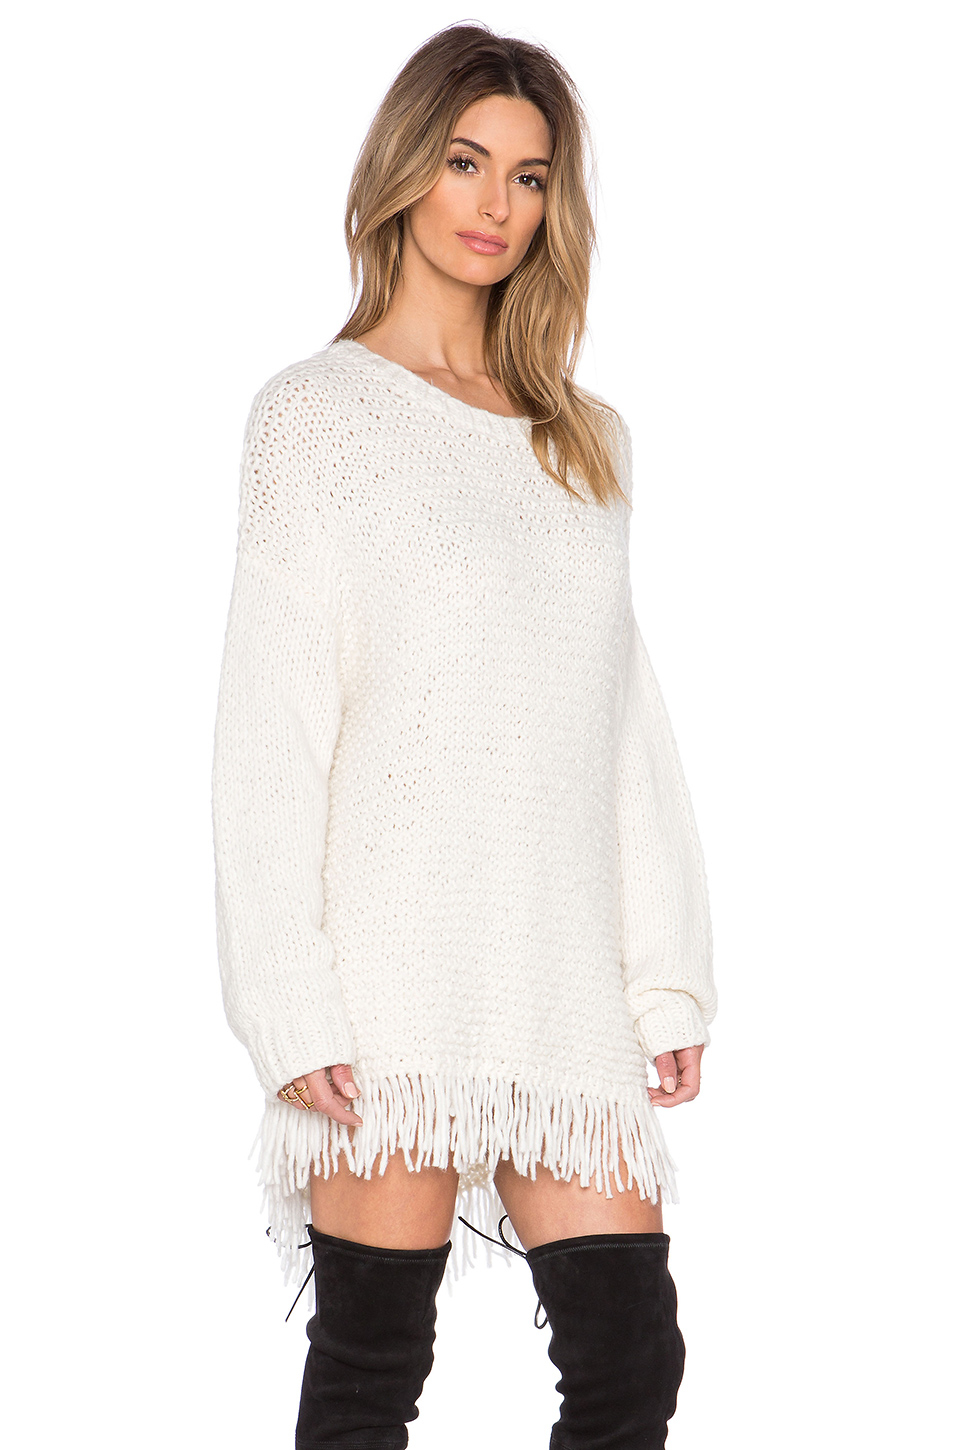 Elizabeth and James Cotton Fringe Sweater in Ivory (Natural) - Lyst